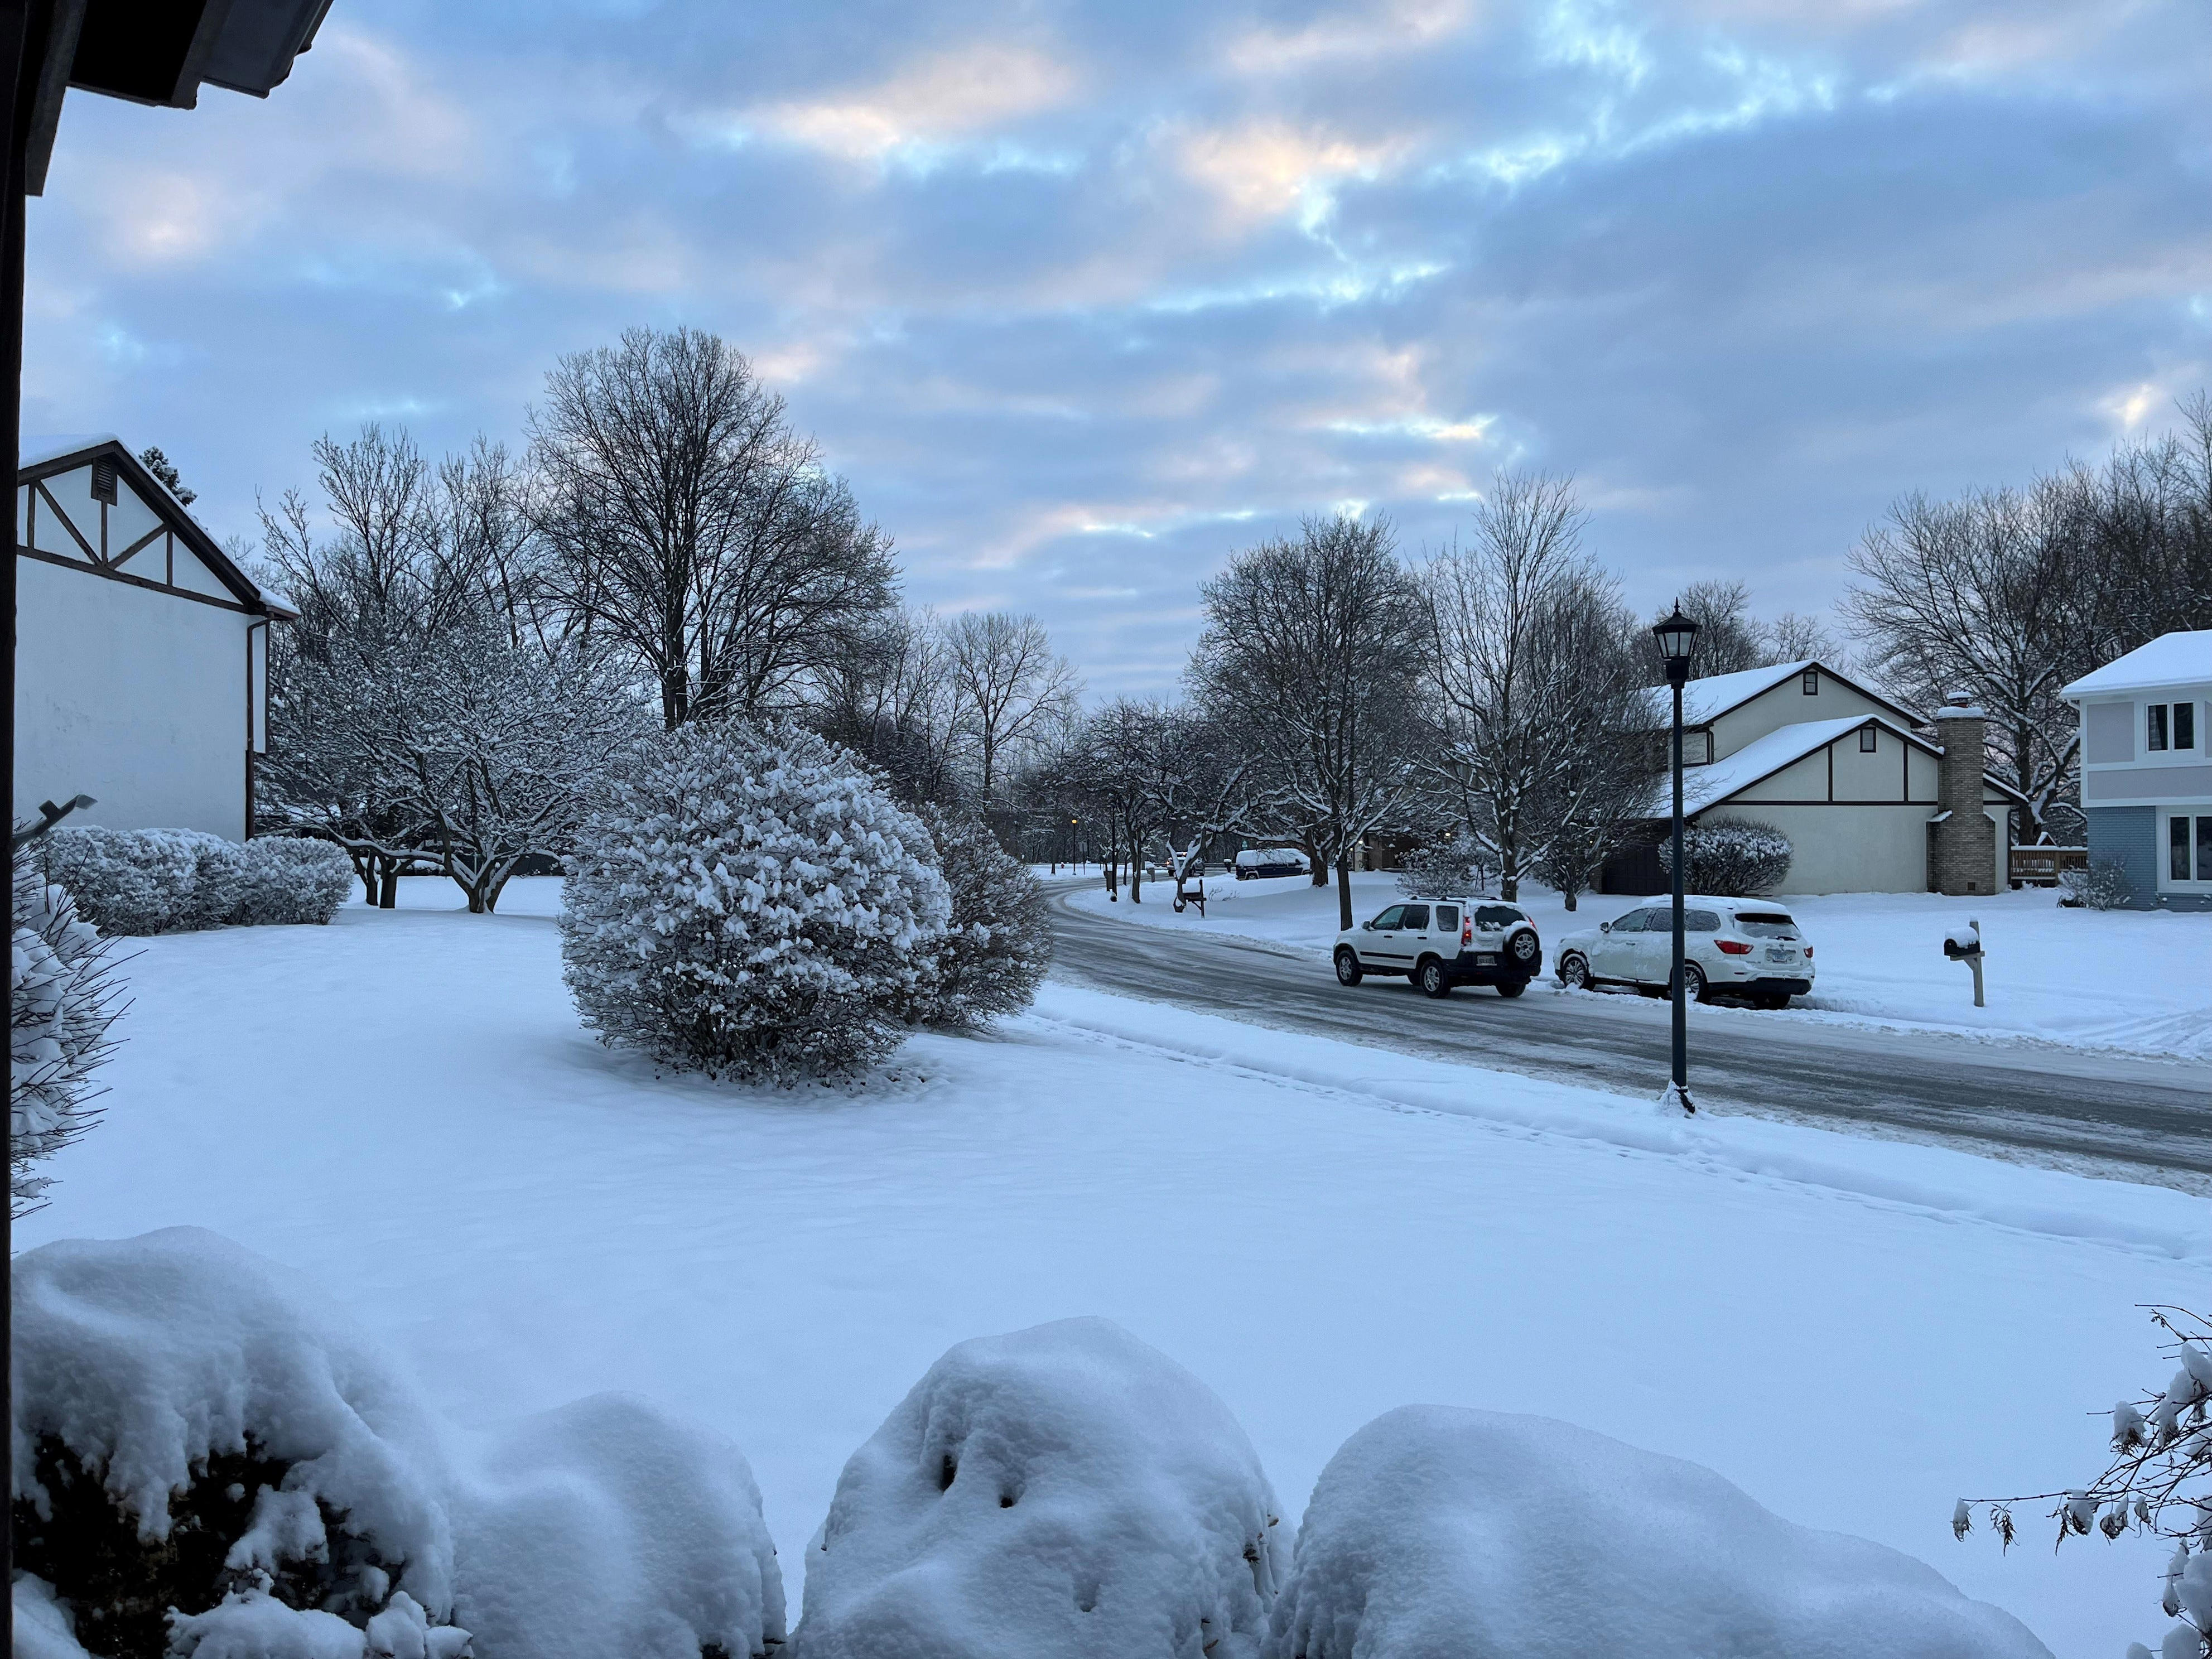 winter weather hits central ohio - how much snow did we get?